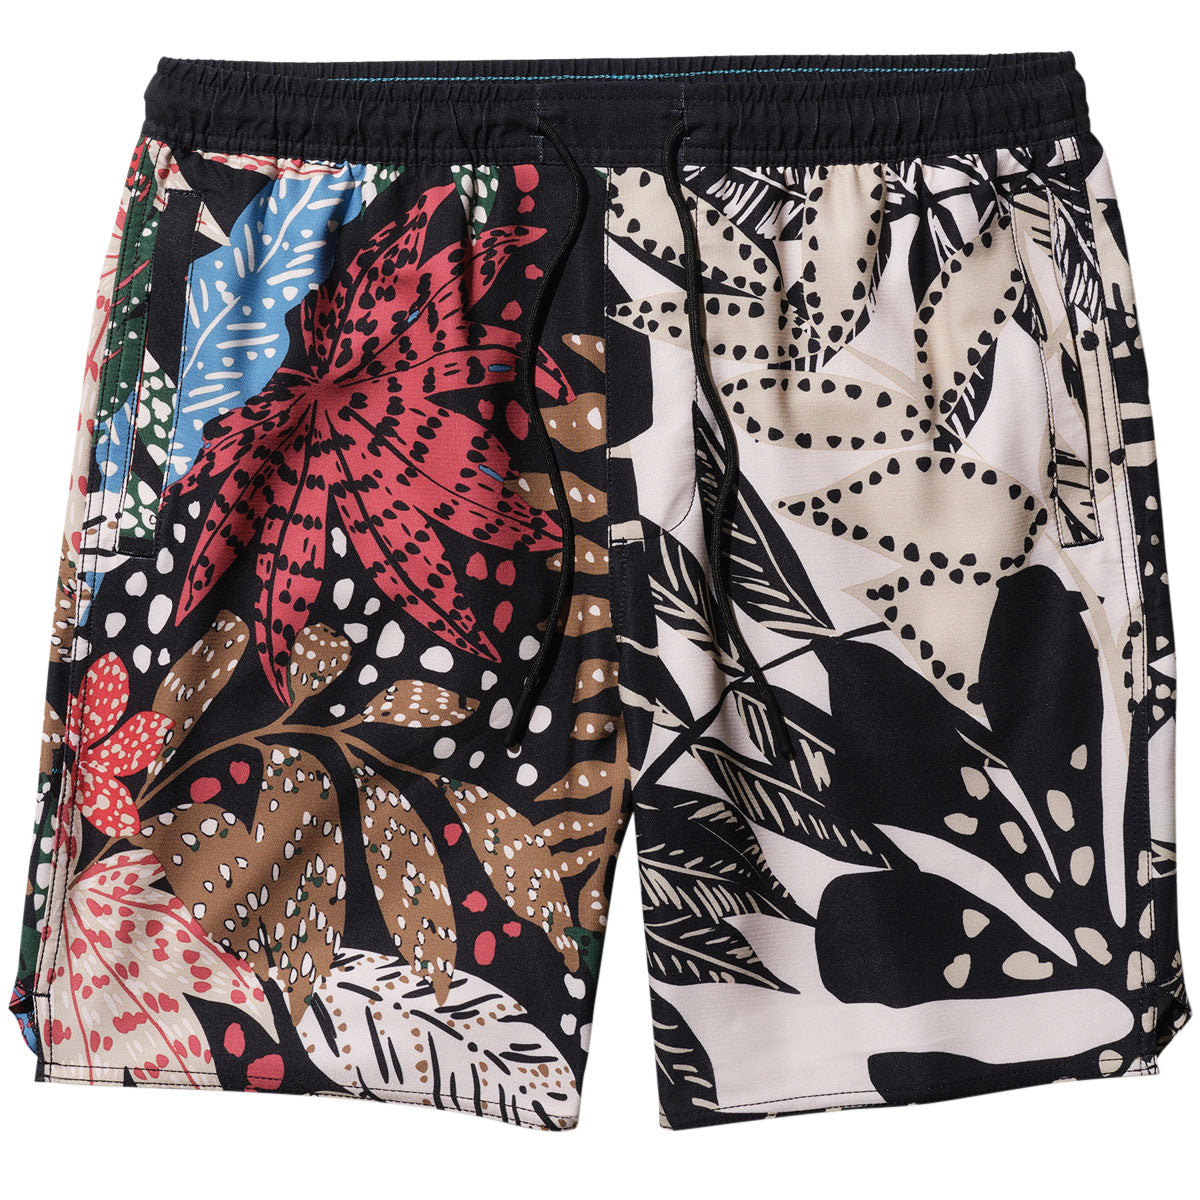 Stance Complex Shorts - Tropical Tide image 1